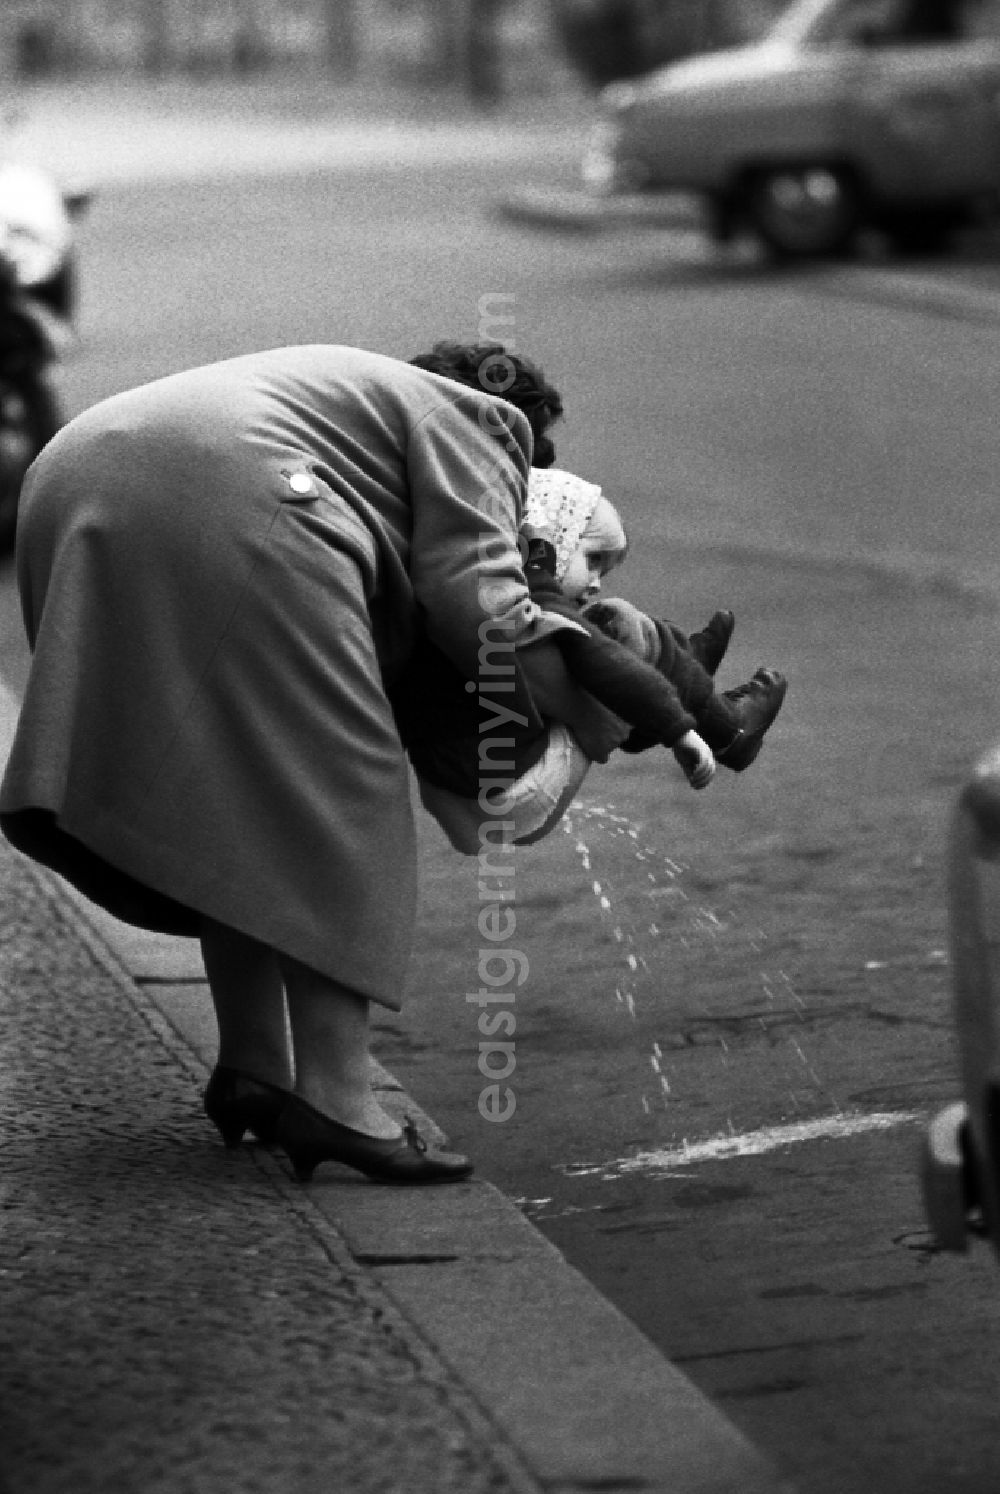 Berlin: Girl pees on the street in East Berlin in the area of the former GDR, German Democratic Republic